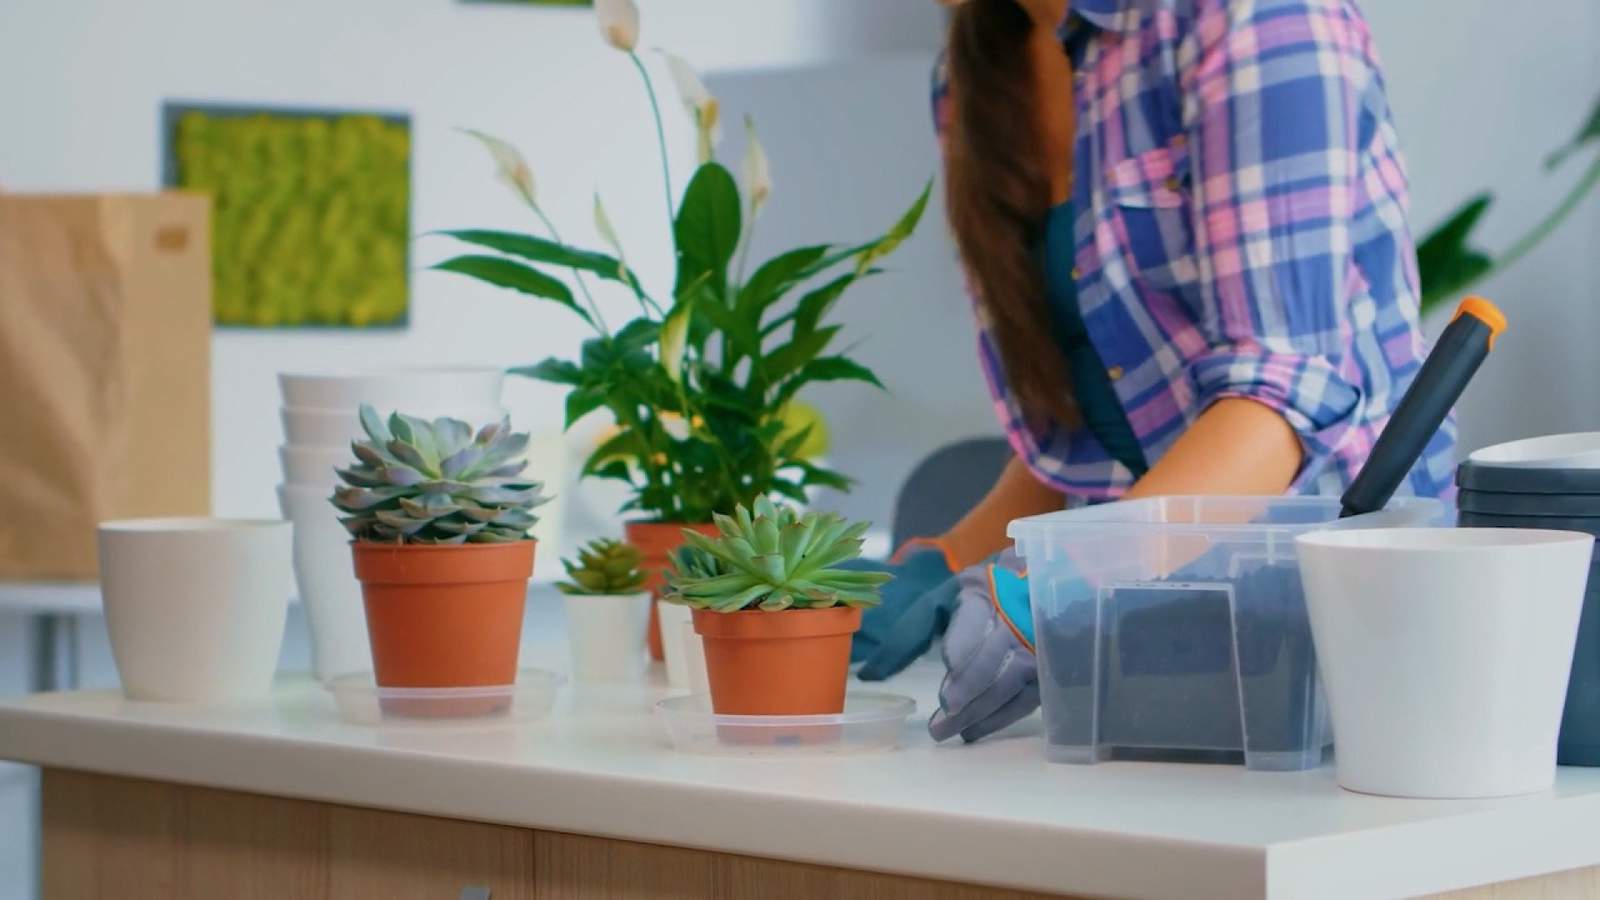 Here’s why Millennials and Gen Zers are filling homes with plants